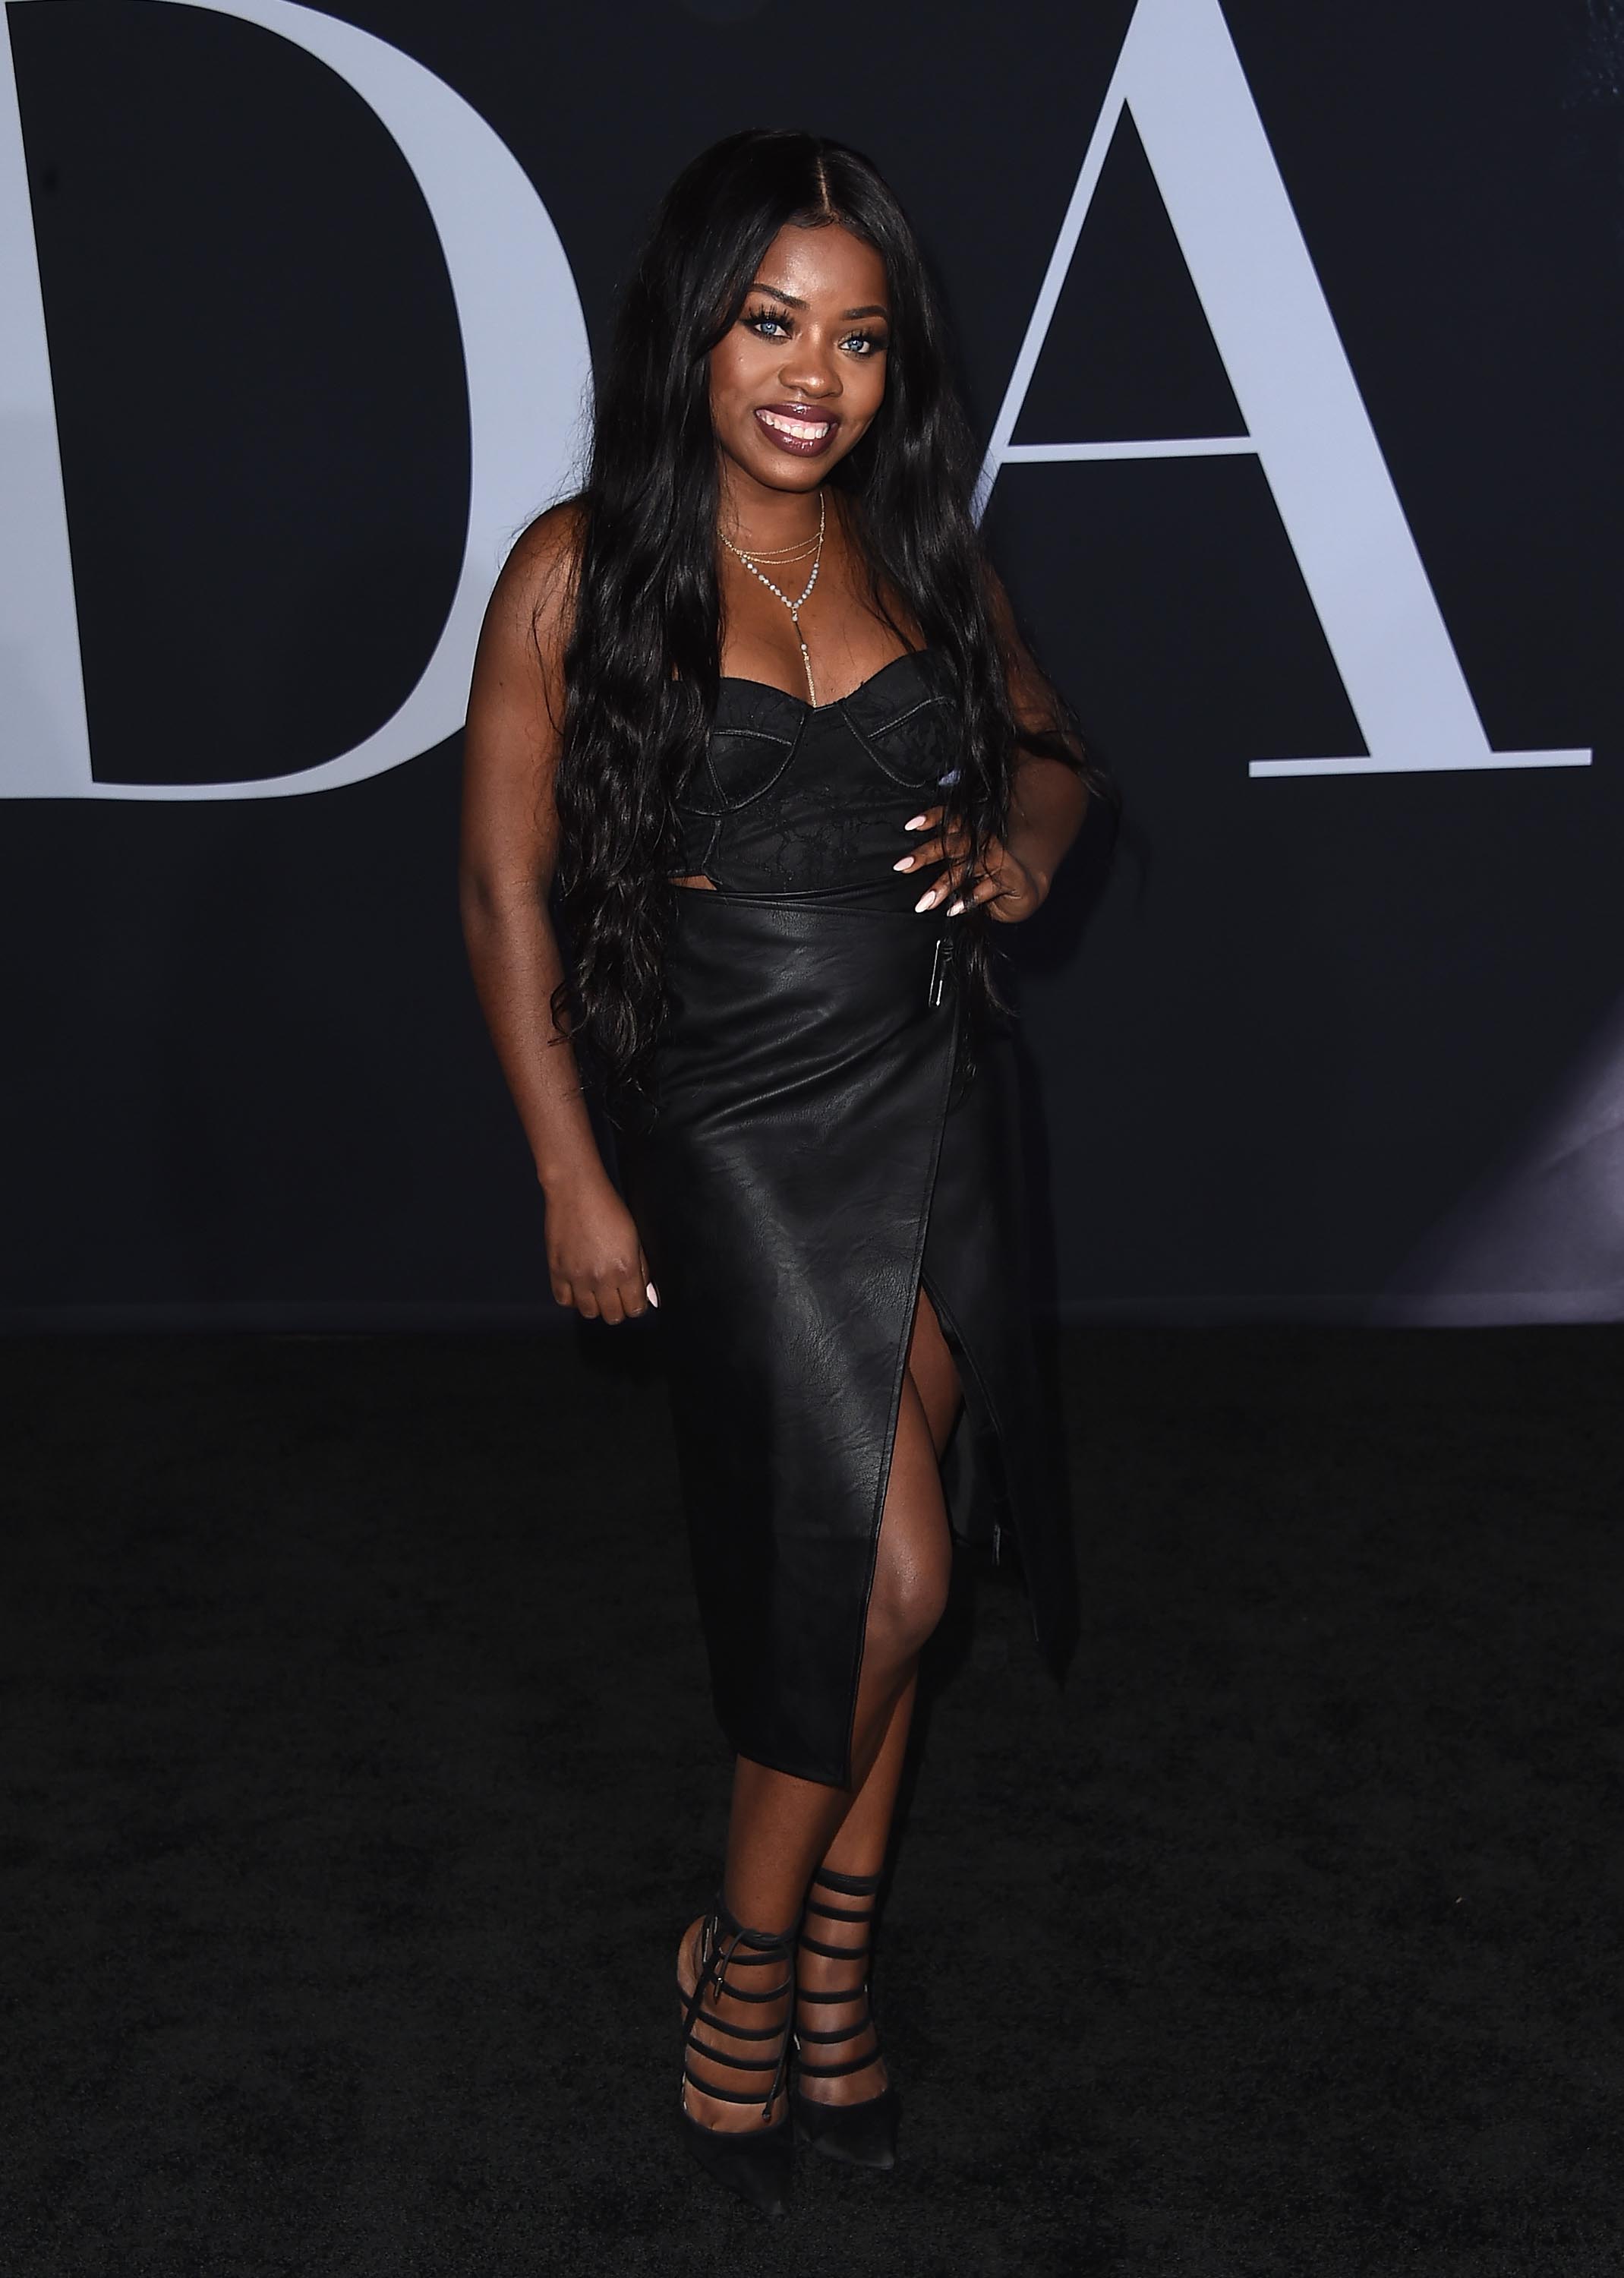 Cydnee Black attends the premiere of Universal Pictures’ ‘Fifty Shades Darker’